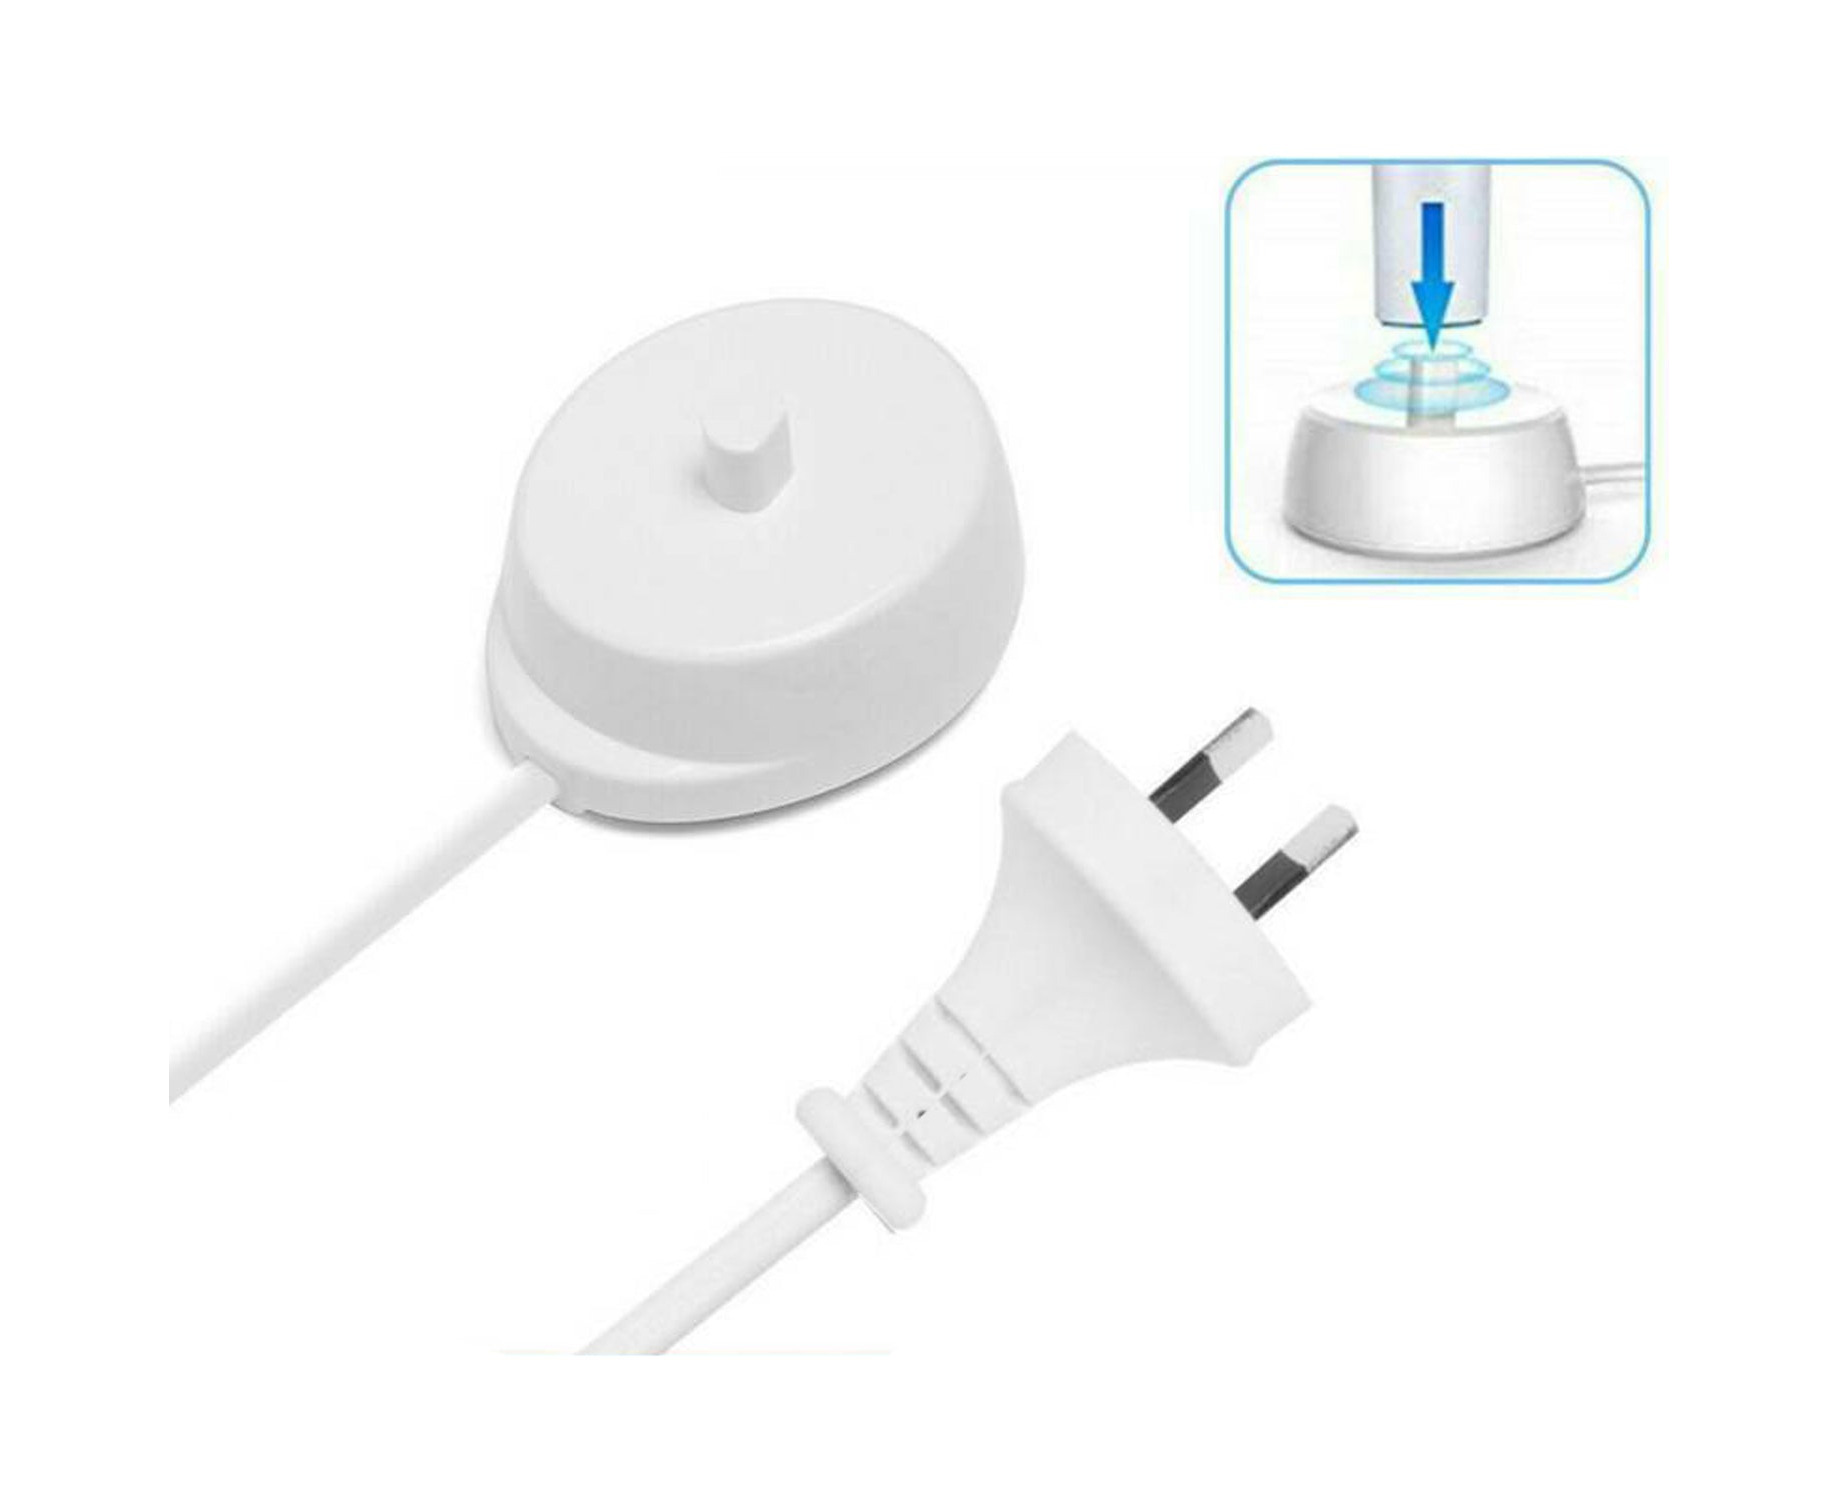 ELECTRIC CHARGER TOOTHBRUSH Dock Base For BRAUN ORAL-B 3757 4729 OralB  Model AU $15.79 - PicClick AU